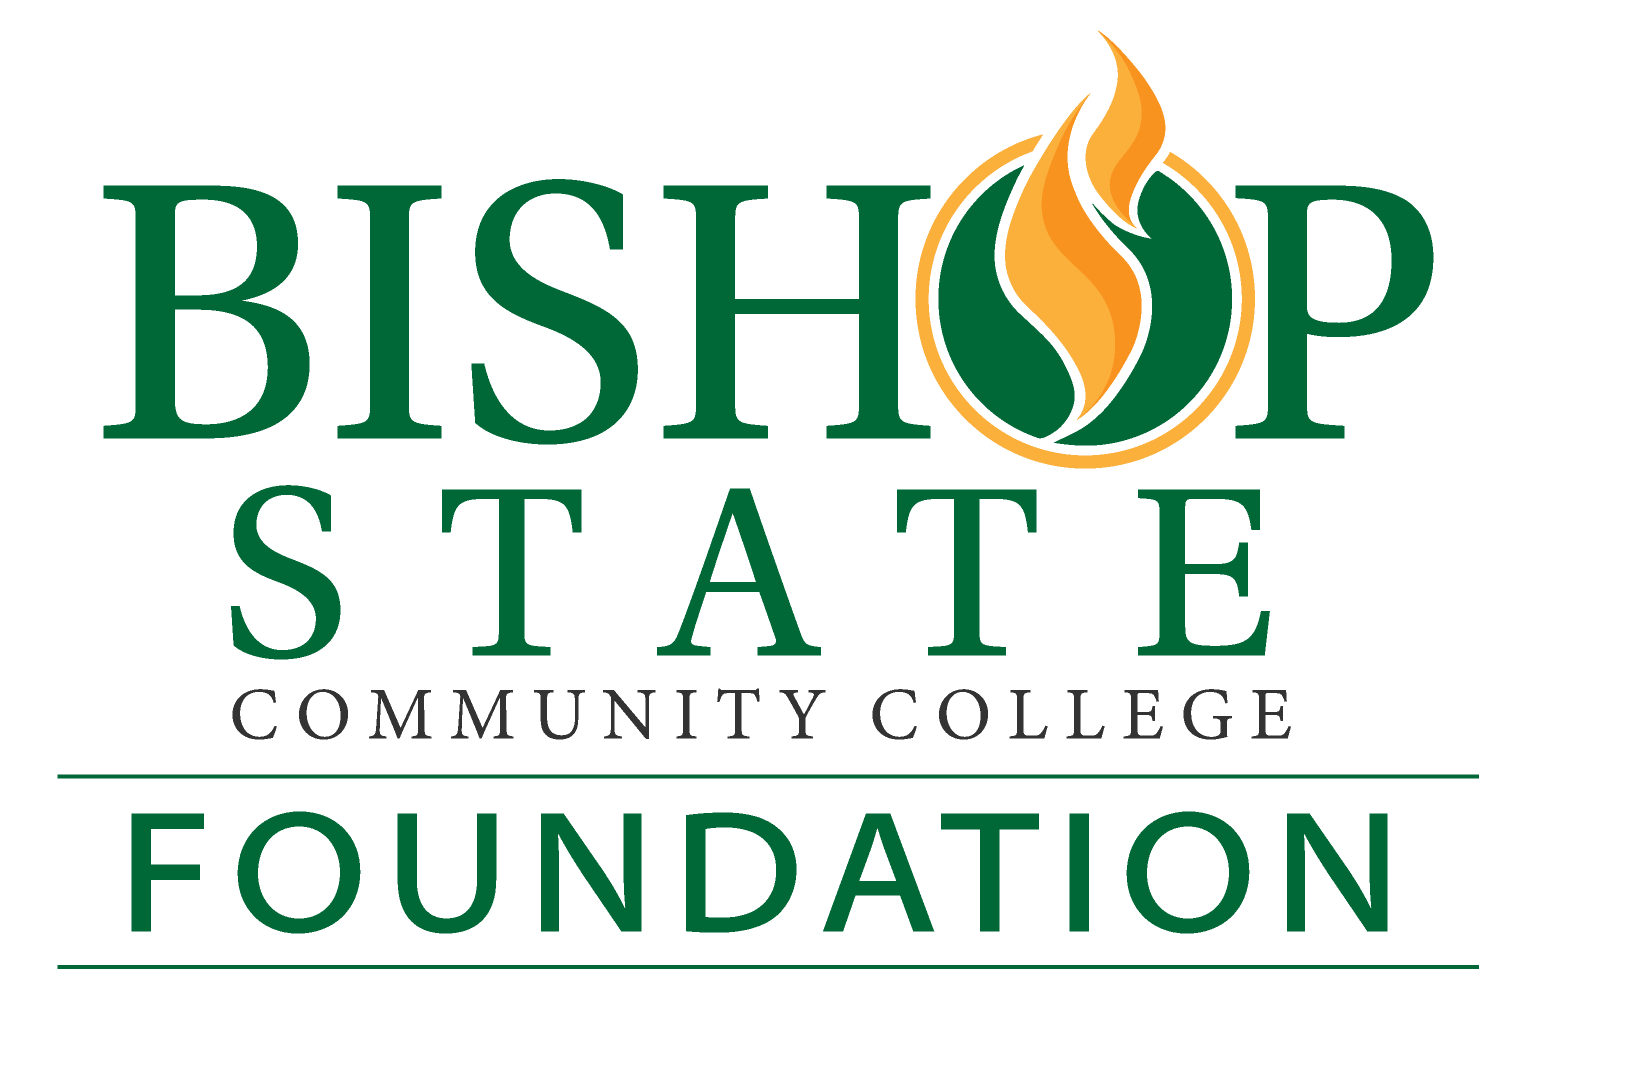 apply-now-foundation-spring-2021-scholarships-closing-soon-bishop-state